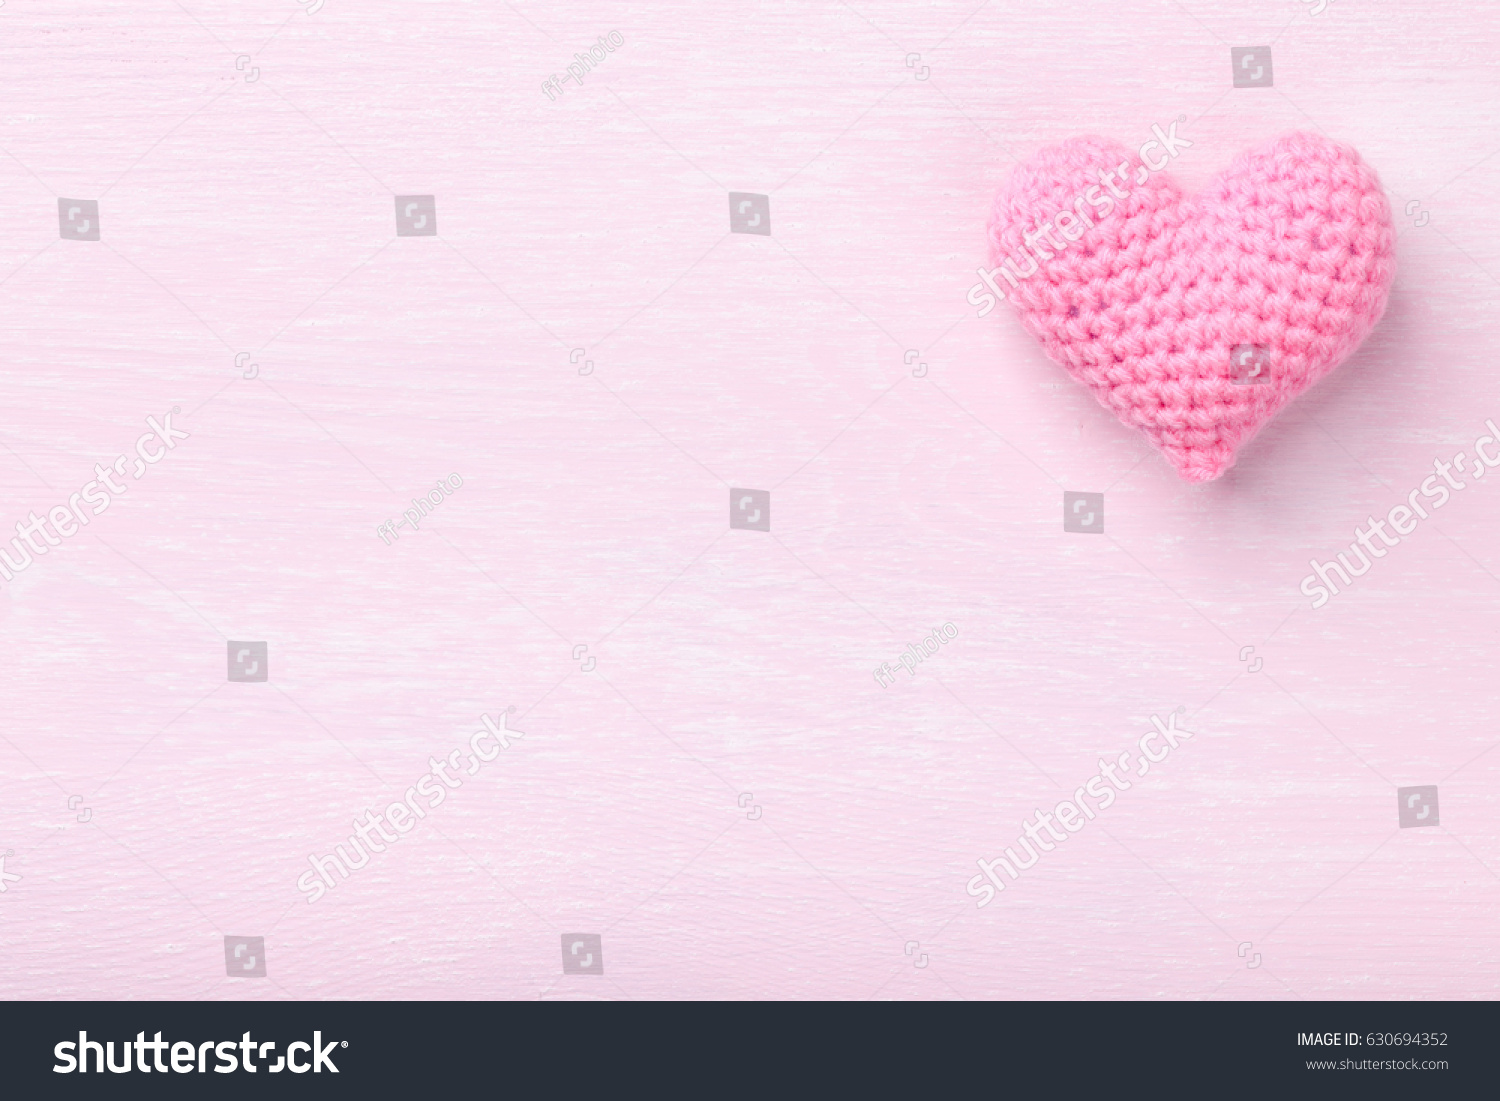 Crochet pink heart on pink wooden background #630694352